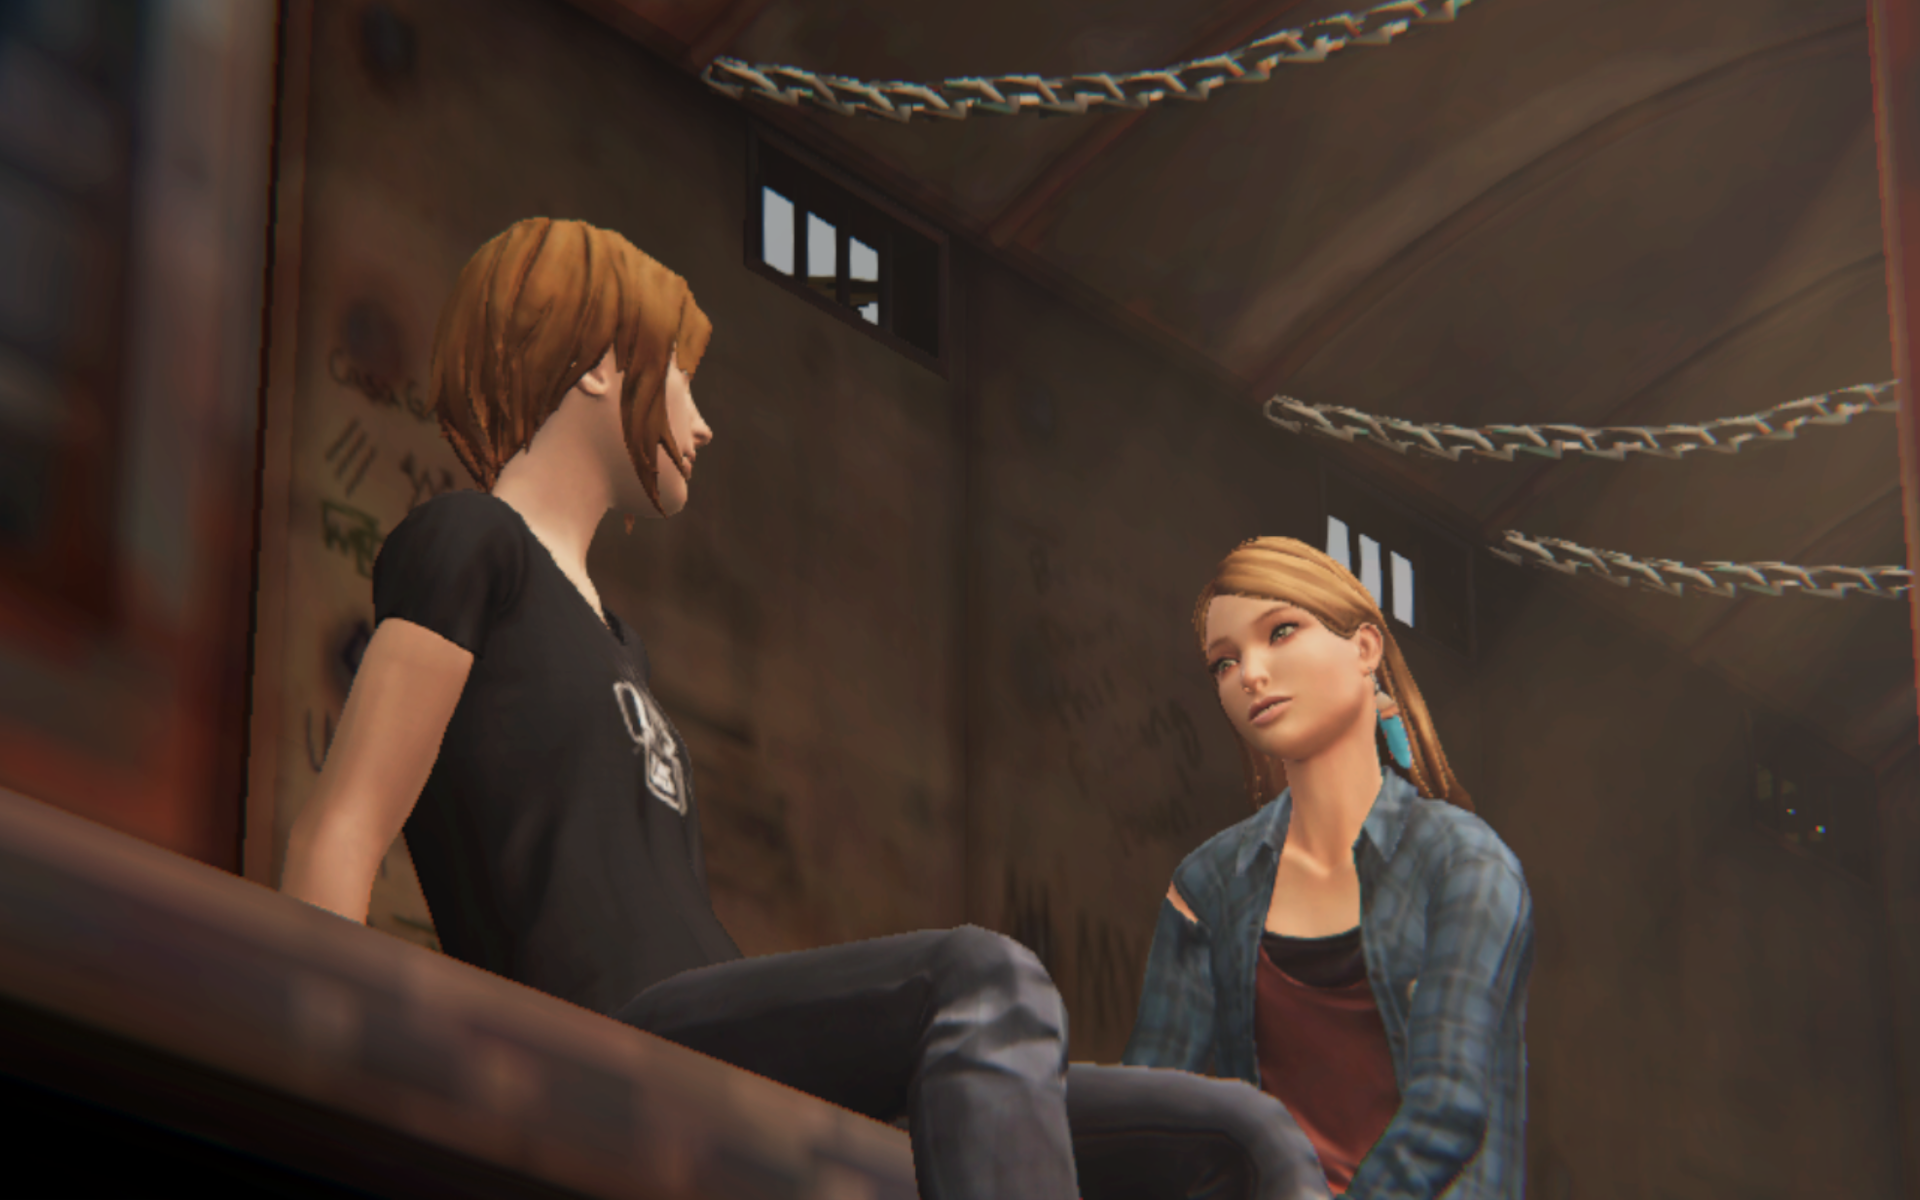 Life is Strange: Before The Storm' Dev Making New Square Enix Game